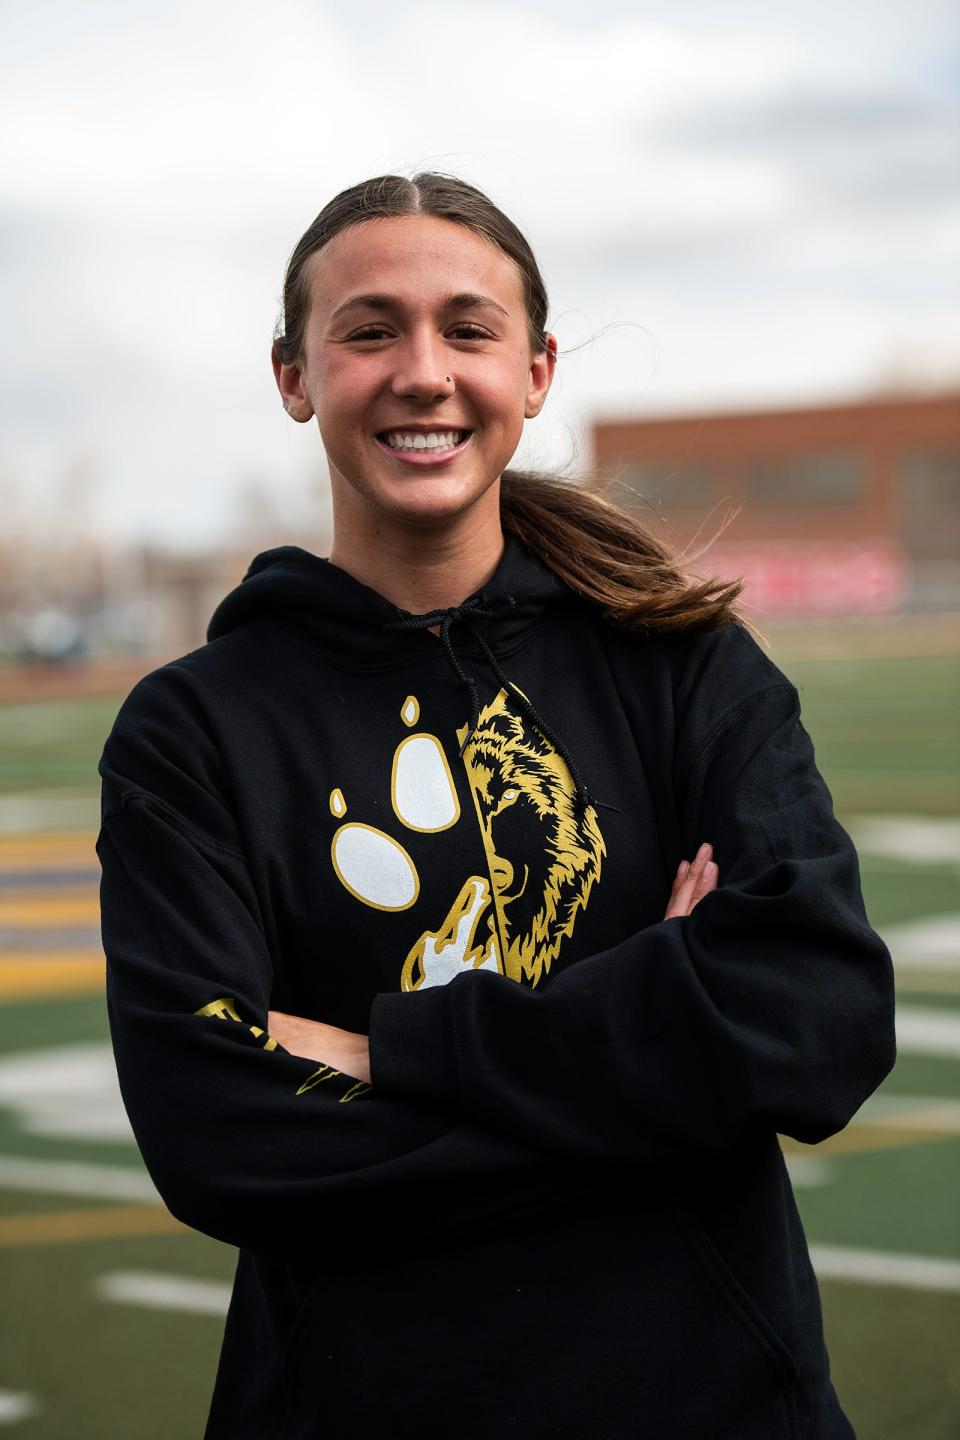 Rocky Mountain girls soccer player Jace Holley poses for a portrait on Tuesday at Rocky Mountain High School in Fort Collins.